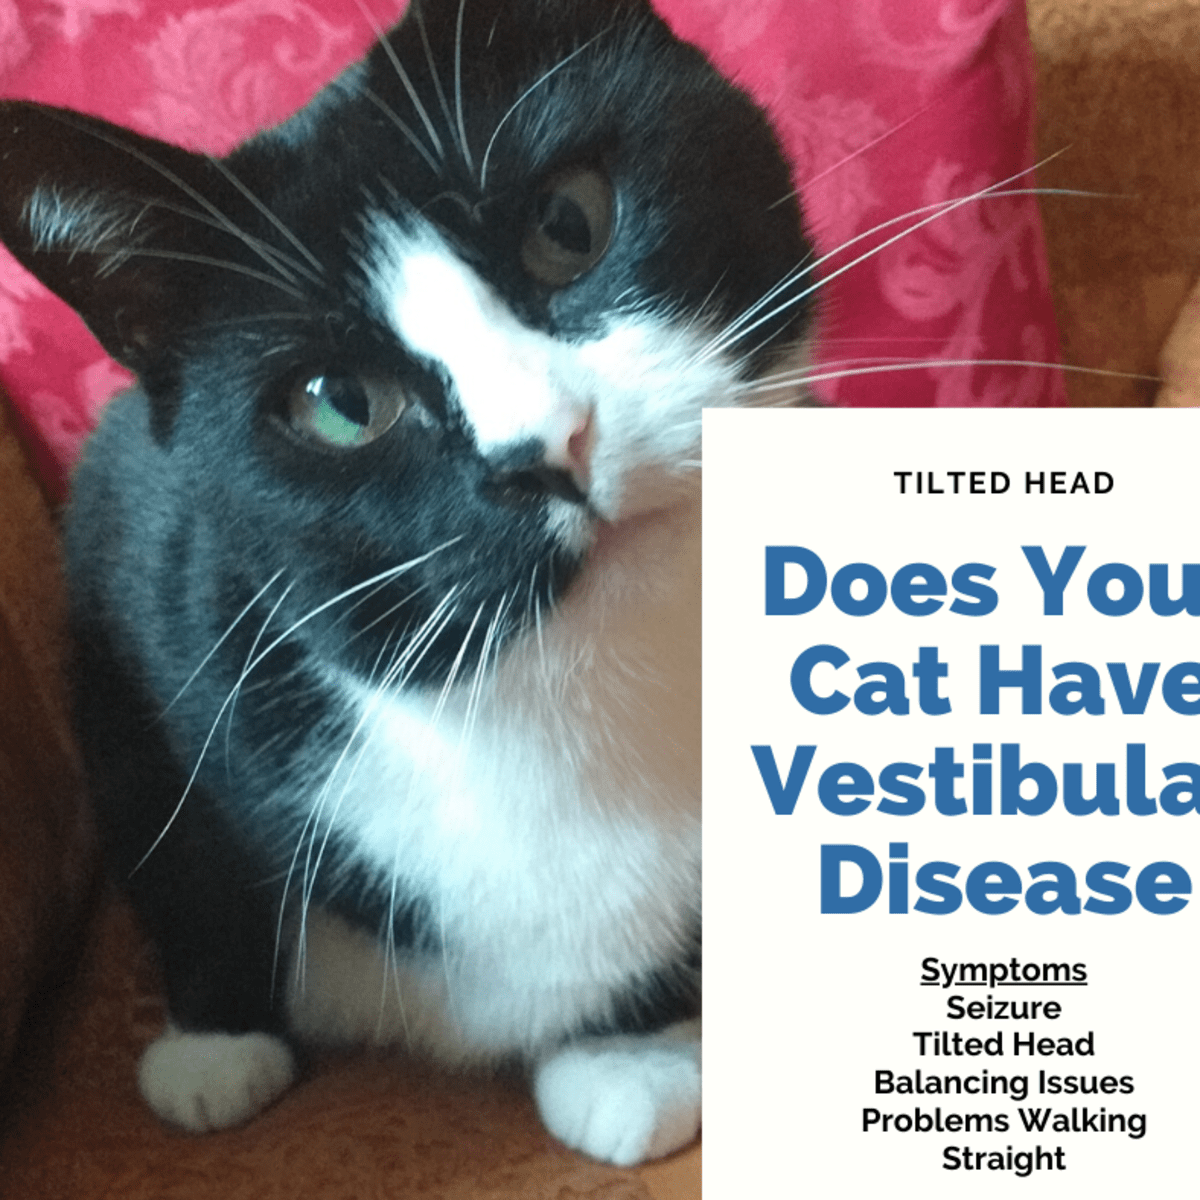 58 Top Images Signs Your Cat Is Dying Of Thyroid Disease - Hyperthyroidism In Cats Daniel Island Animal Hospital